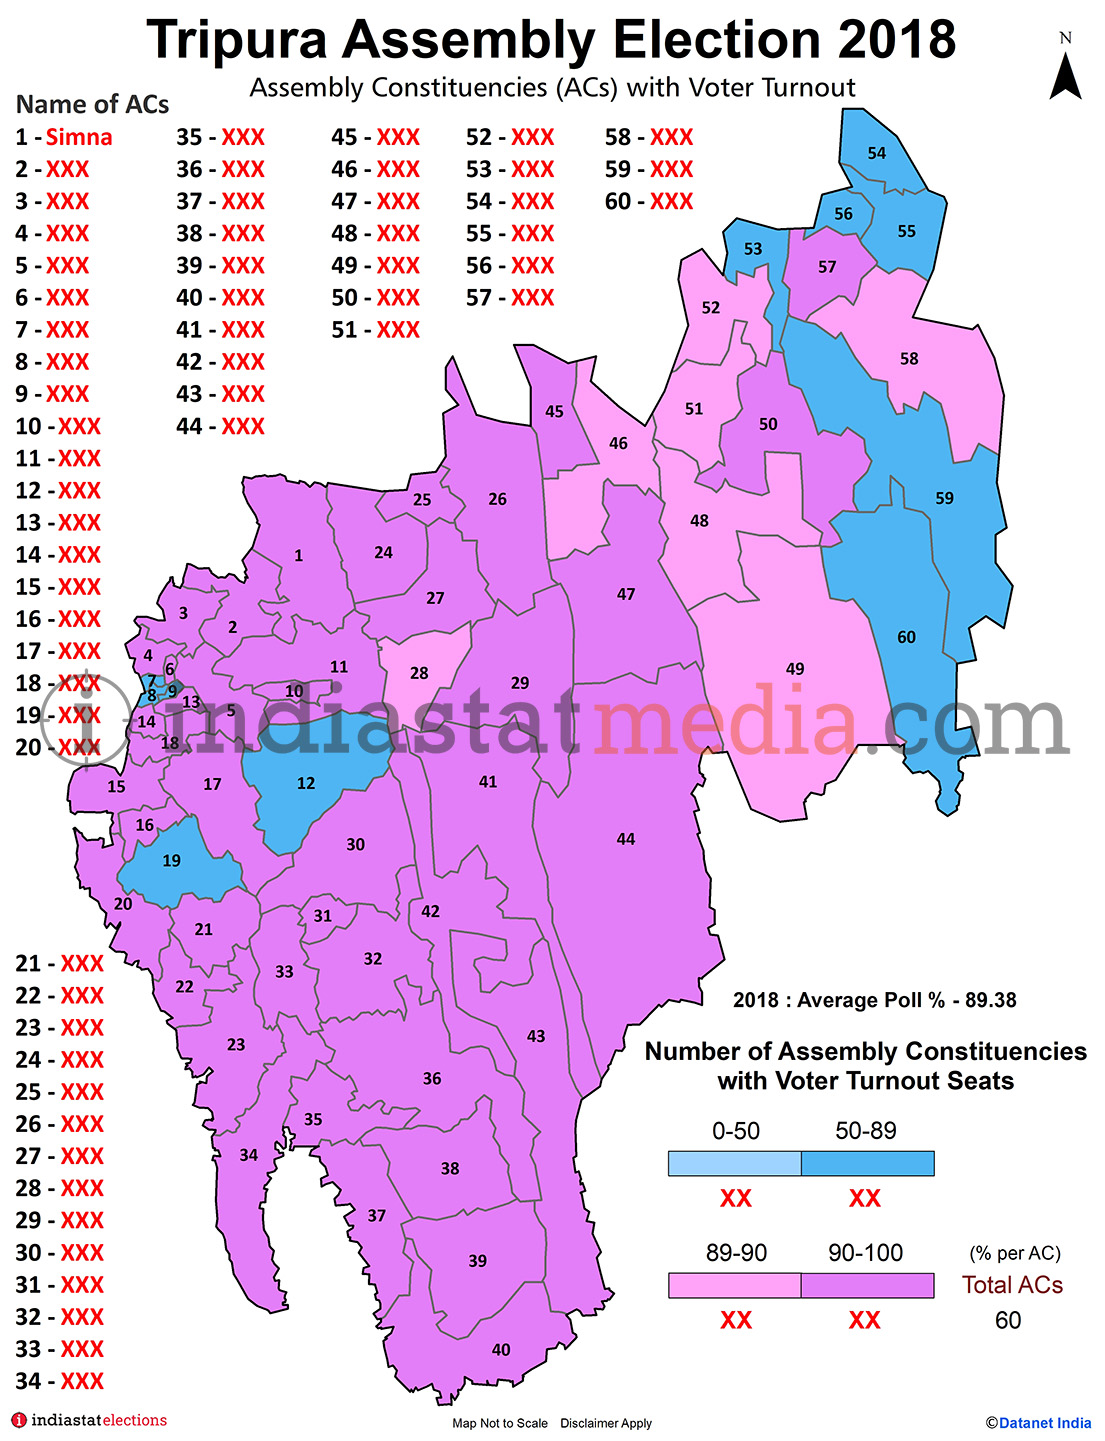 Assembly Constituencies (ACs) with Voter Turnout in Tripura (Assembly Election - 2018)